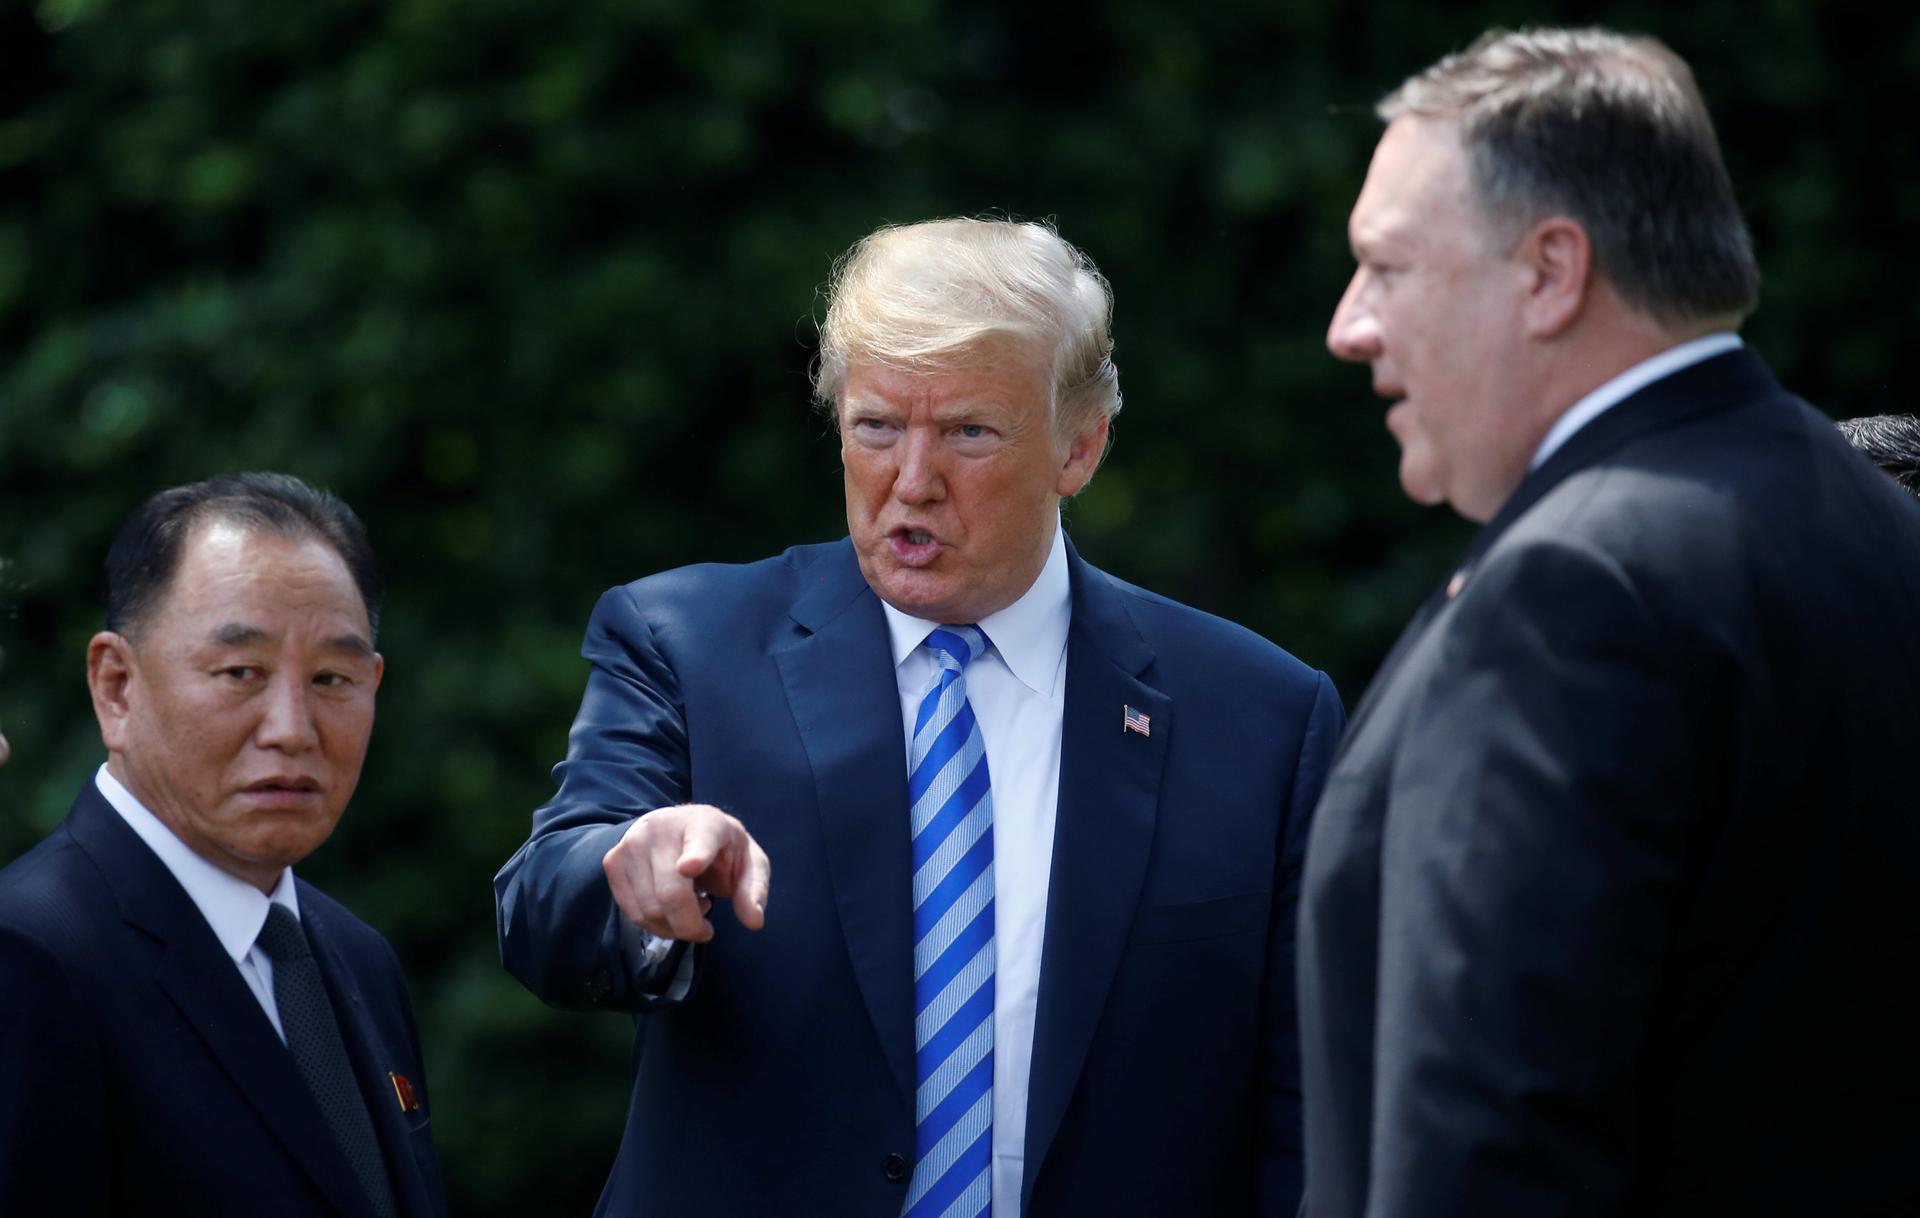 North Korean envoy Kim Yong-chol talks with US President Donald Trump as Secretary of State Mike Pompeo looks on